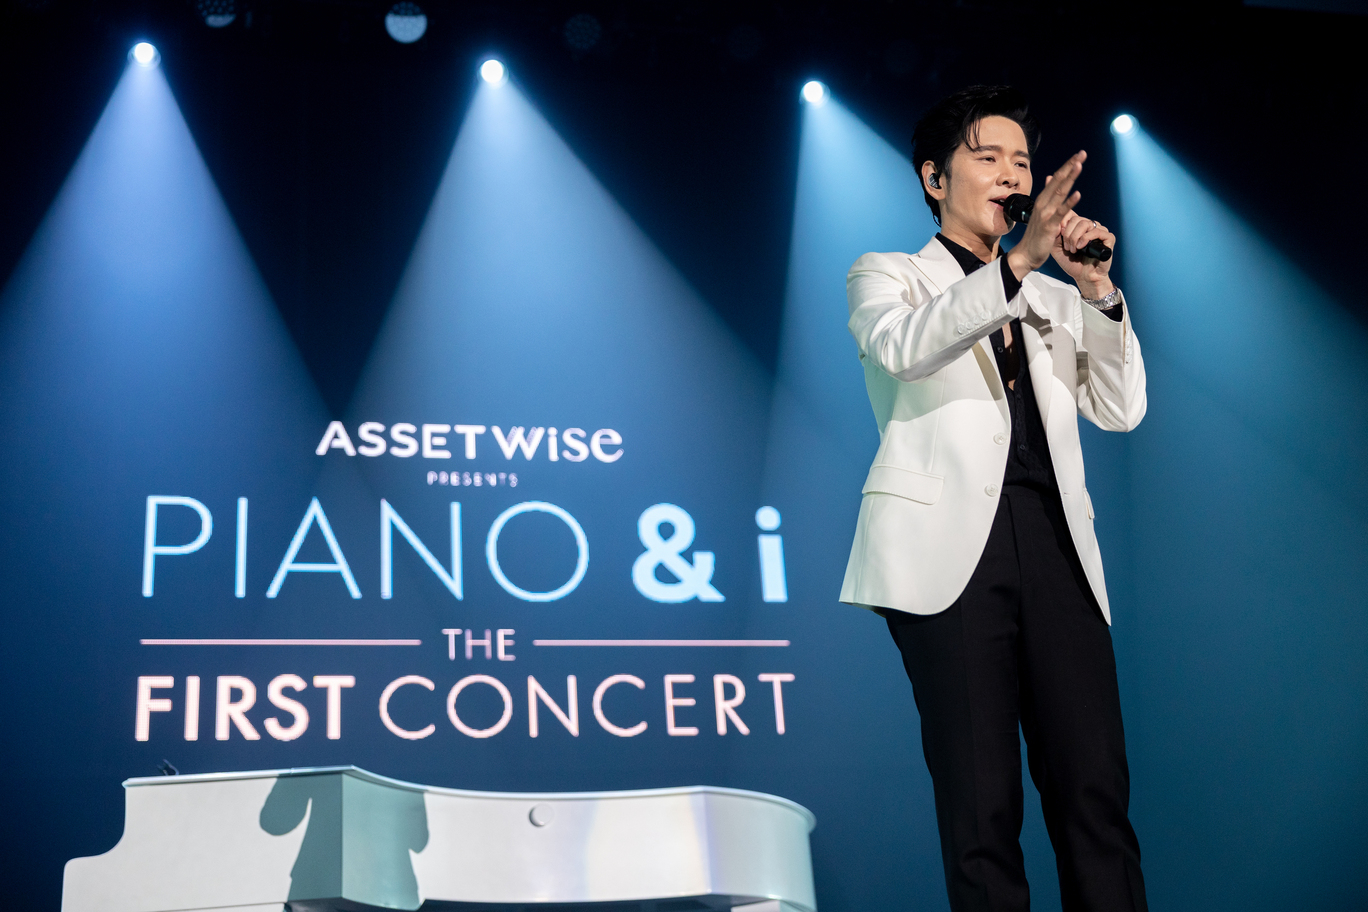 PIANO & i The First Concert